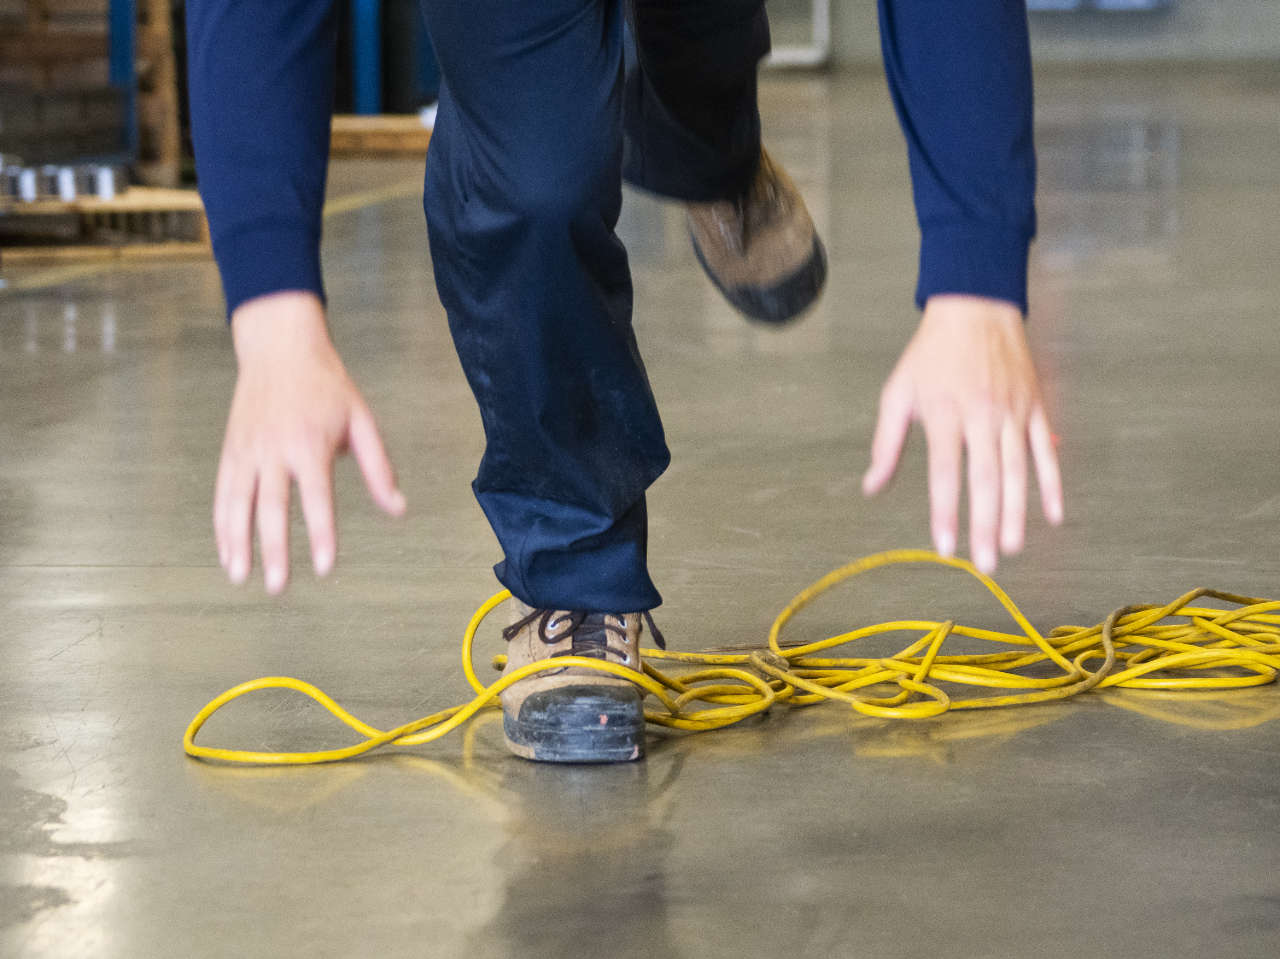 How to avoid slips, trips and falls at work - Praxis42